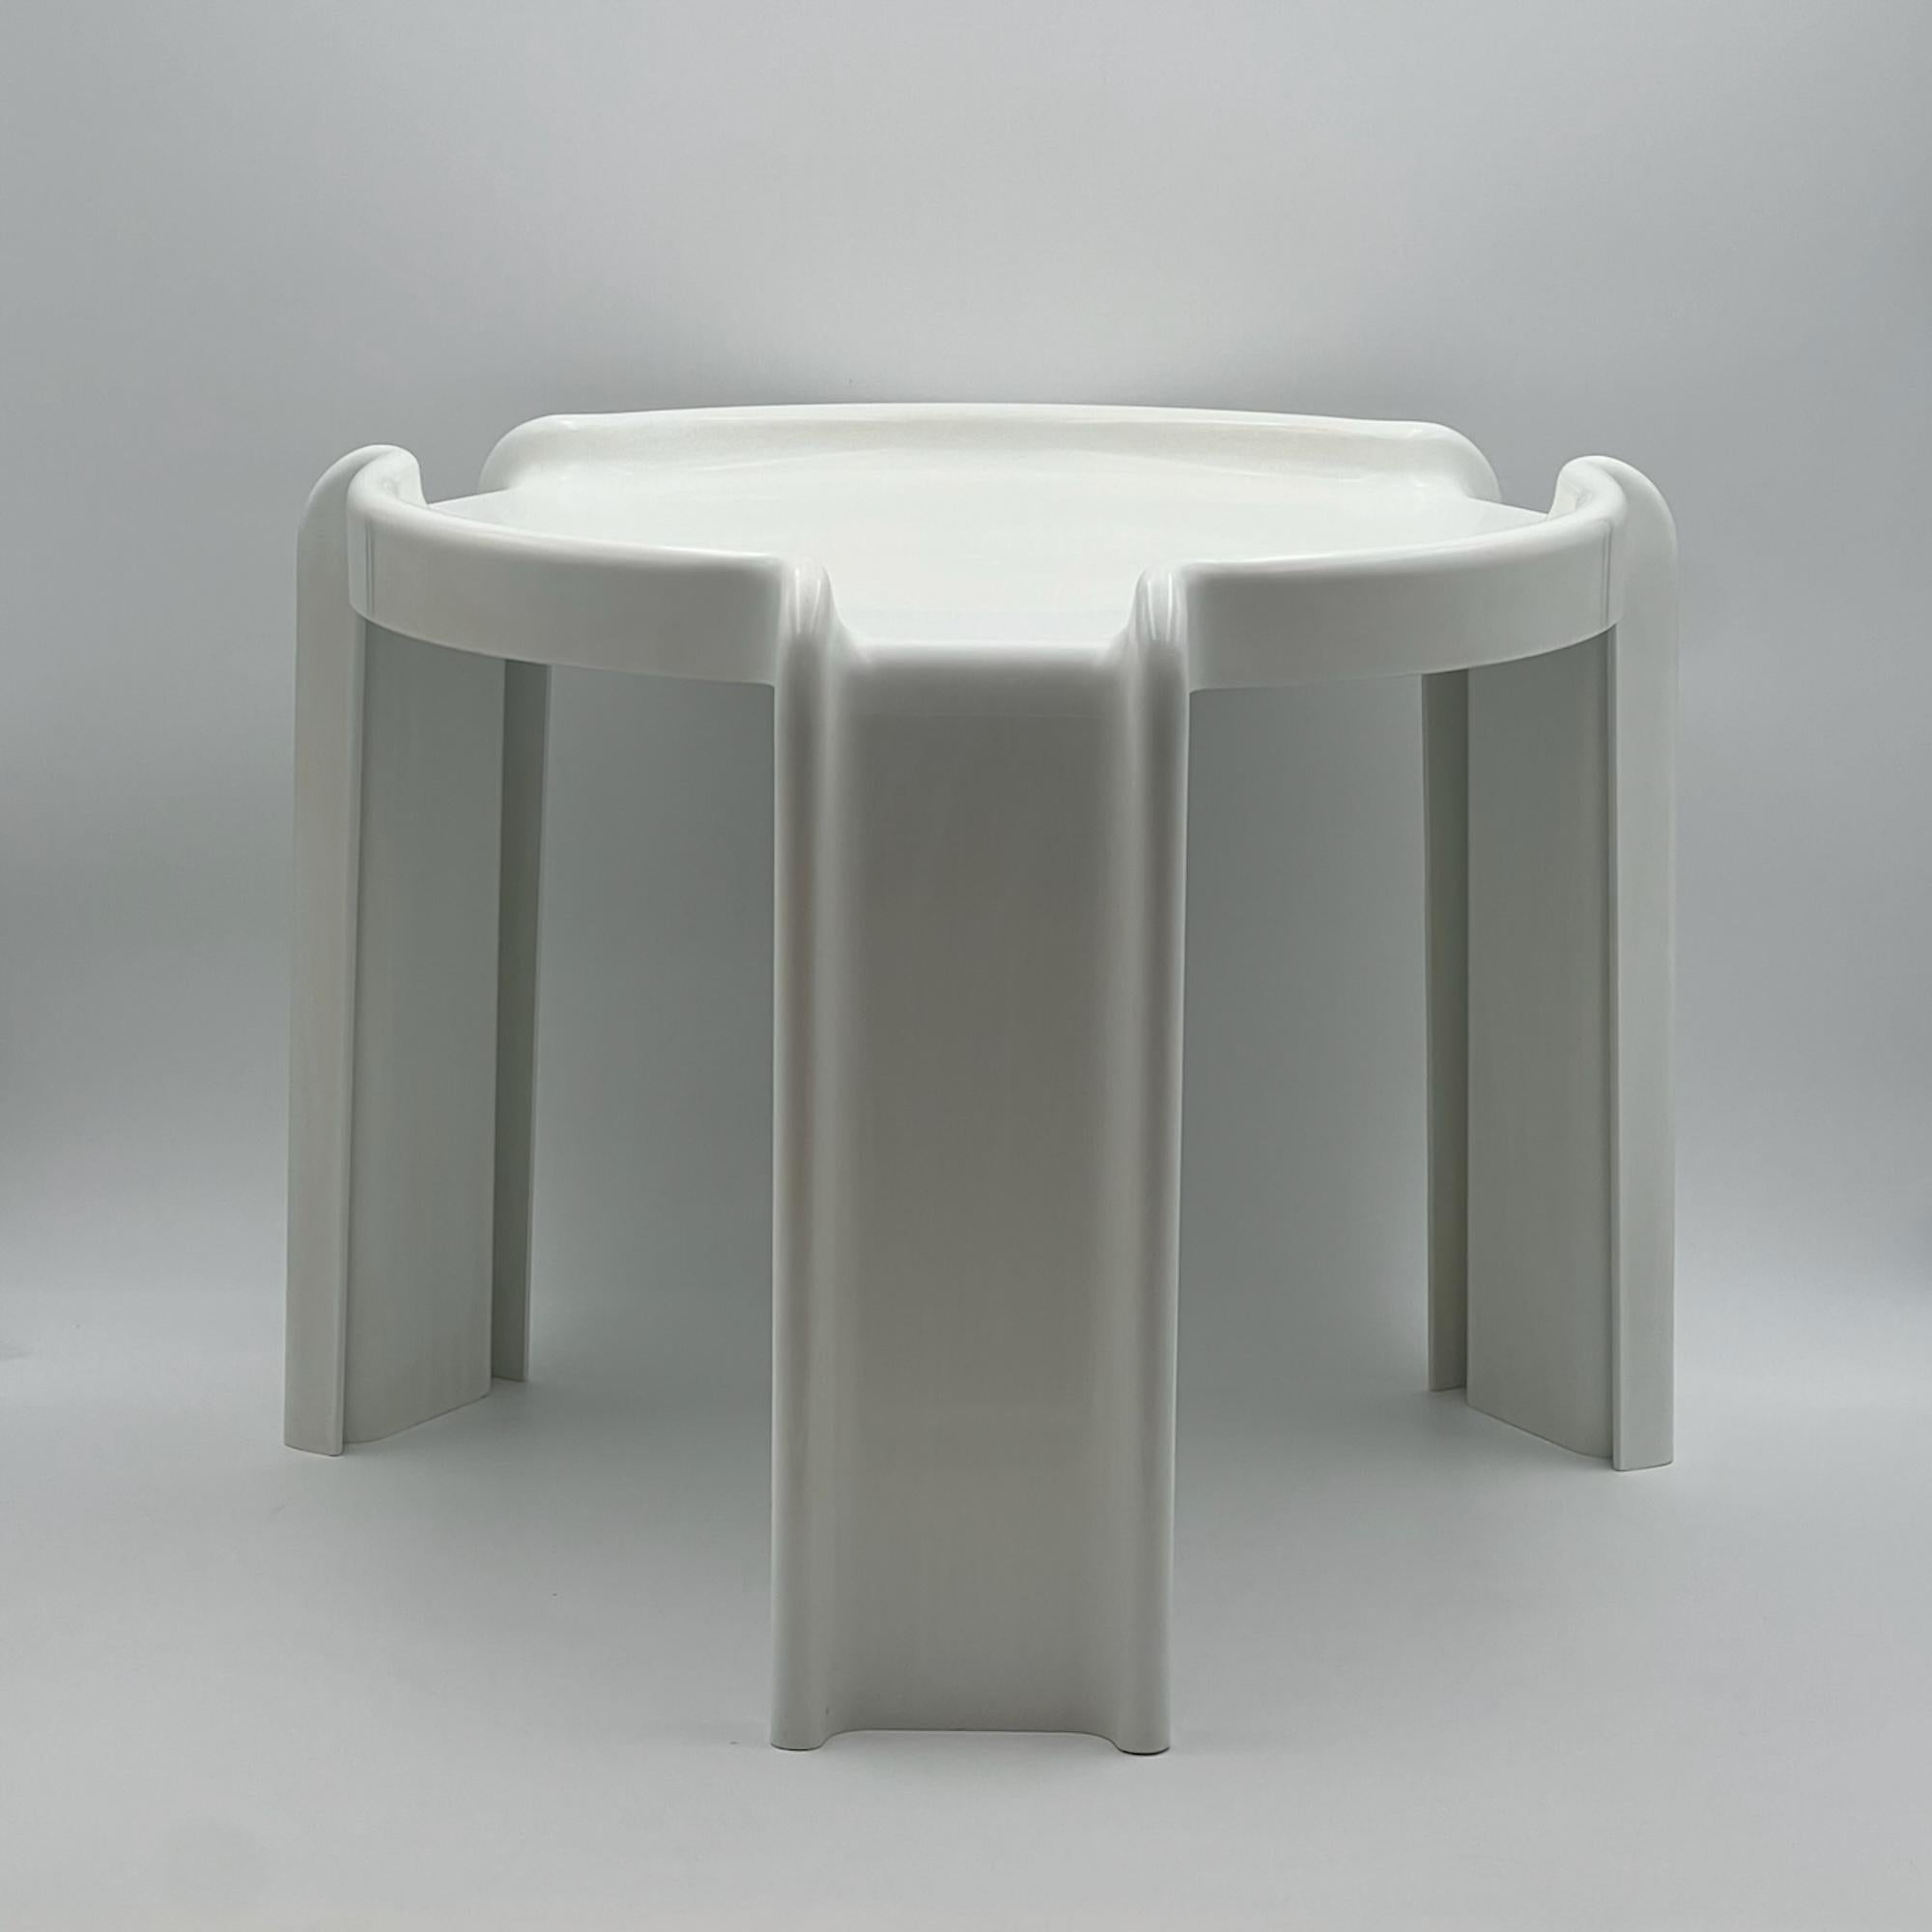 Iconic coffe table model 4905/6/7 designed by Giotto Stoppino in 1968, winner of the renowned Compasso D’Oro award in 1970s.

Designed in 1968 and honored with the prestigious Compasso D’Oro award in the 1970s, this coffee table represents a